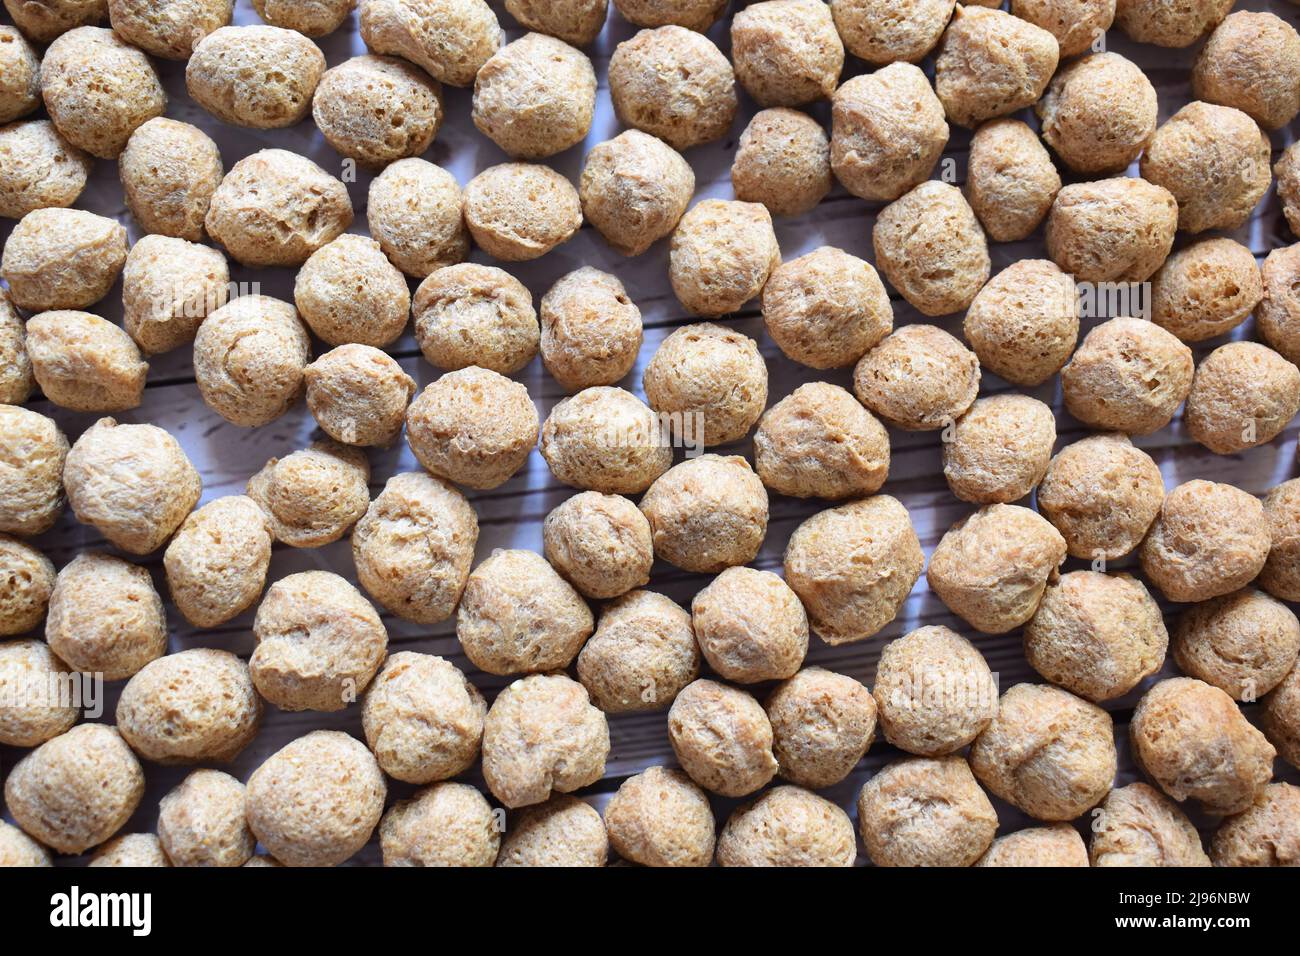 Raw whole dried Soy chunk textured vegetable protein Stock Photo